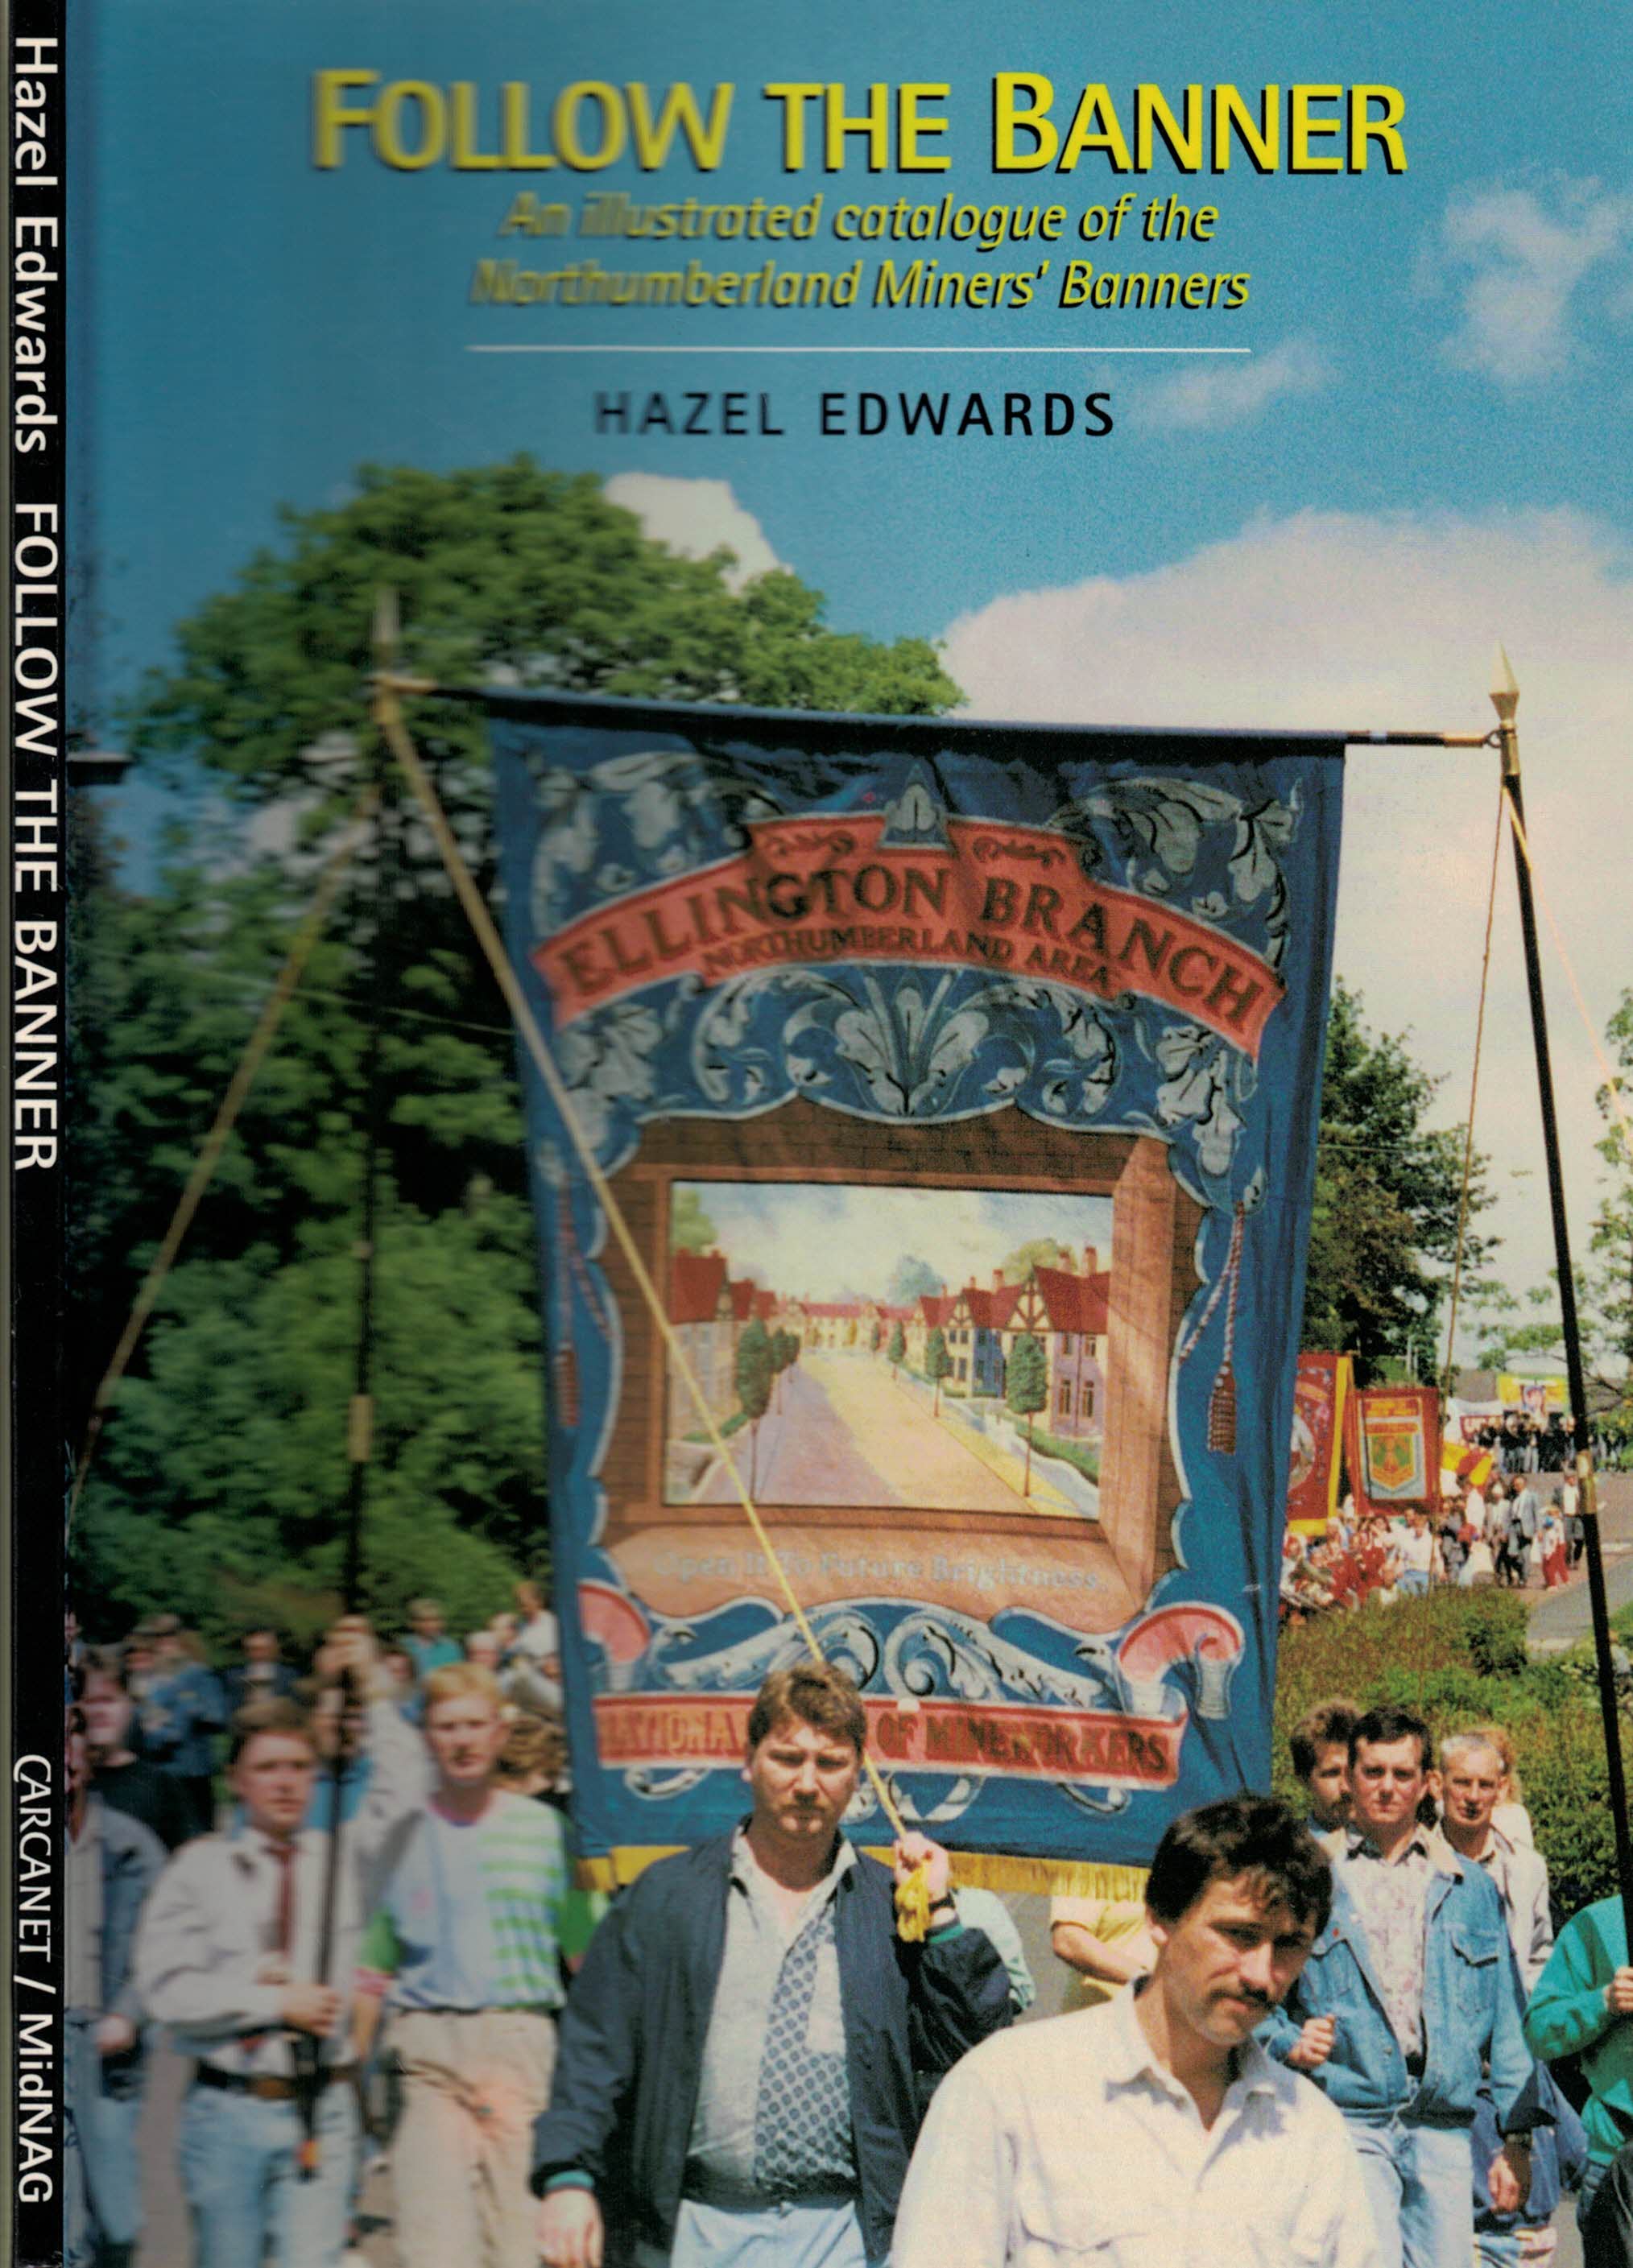 EDWARDS, HAZEL - Follow the Banner. An Illustrated Catalogue of the Northumberland Miners' Banners